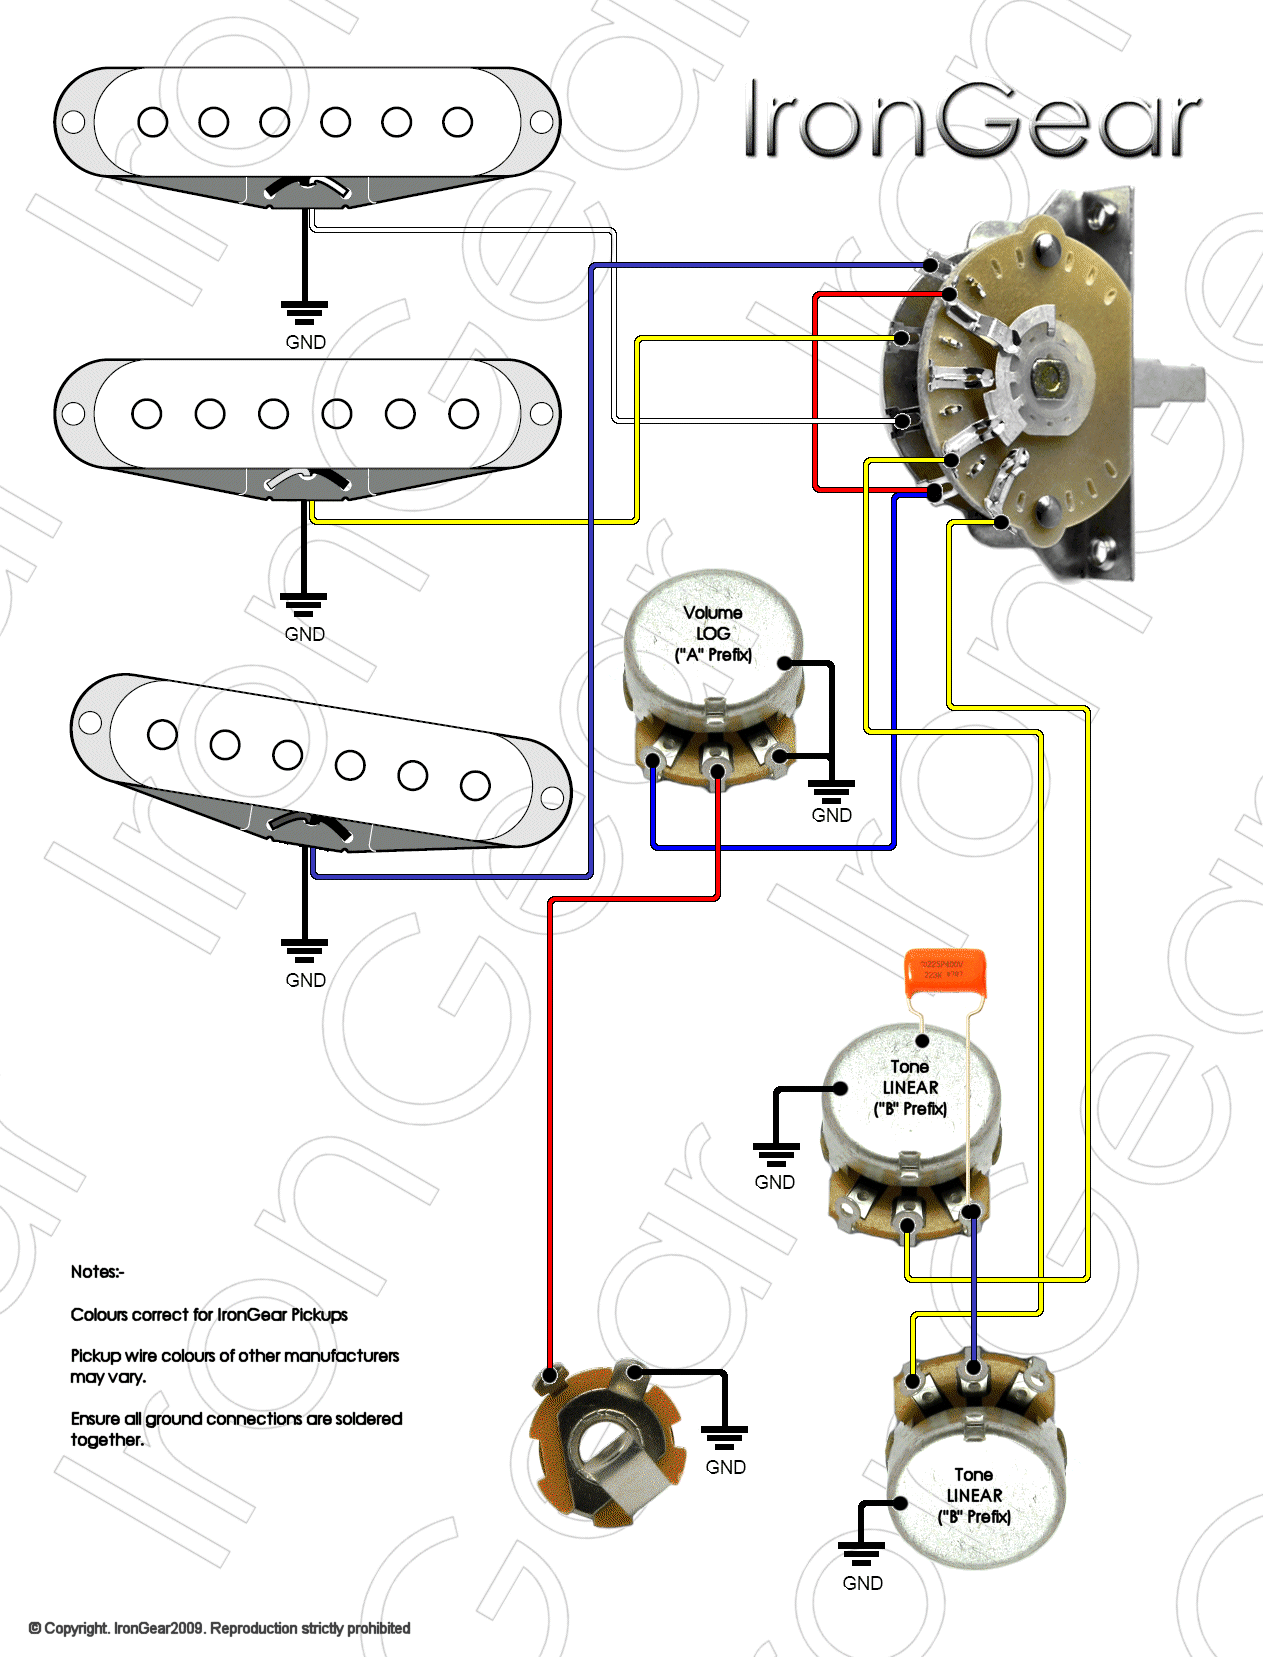 3 Way Guitar Switch Wiring Diagram from axetec.co.uk